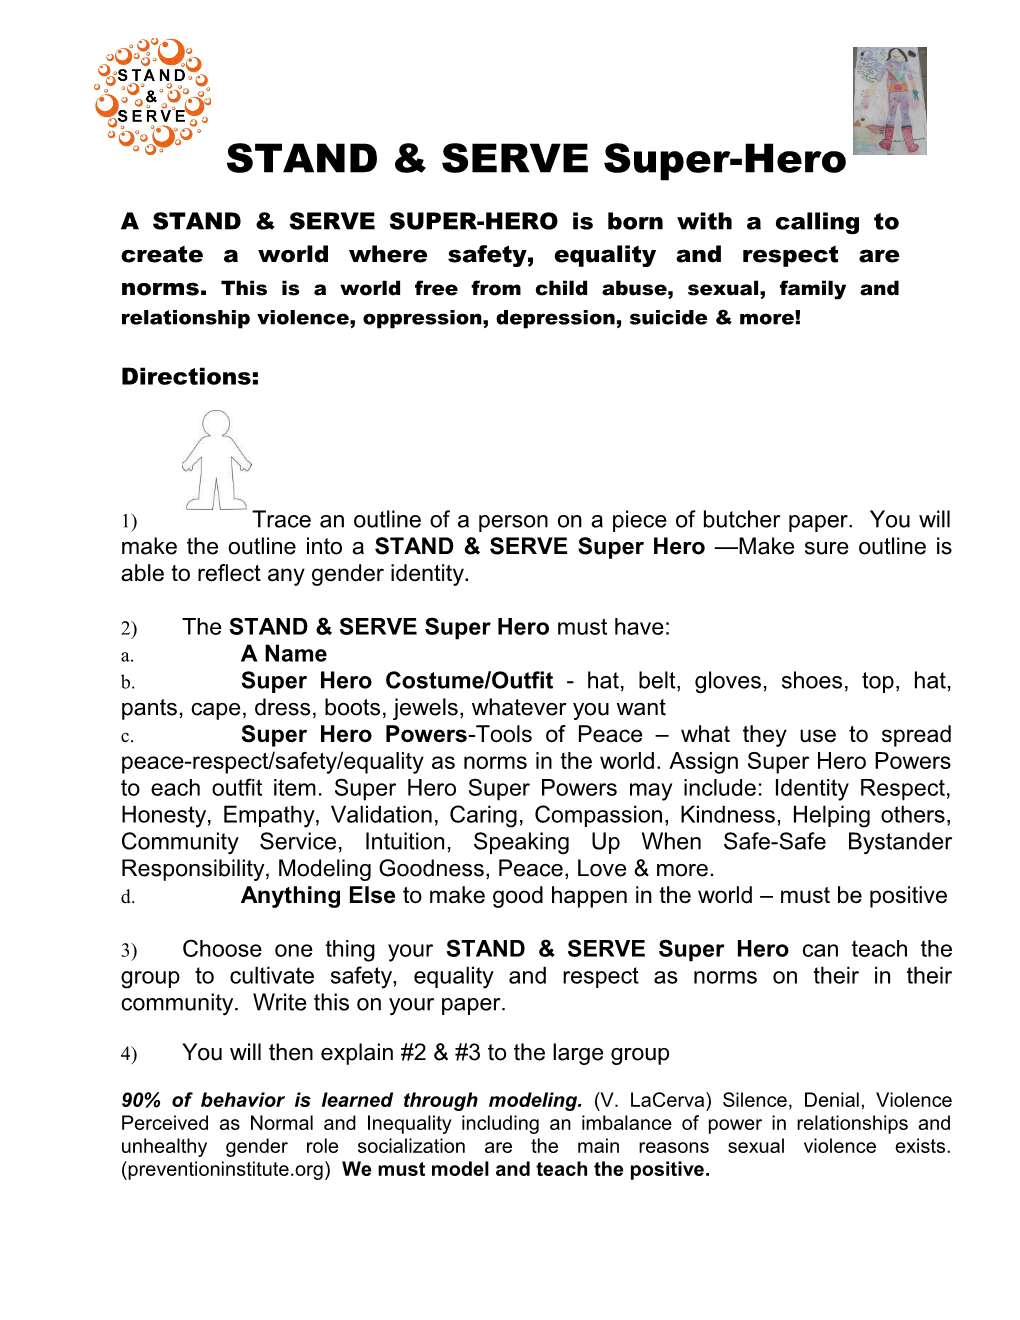 2)The STAND & SERVE Super Hero Must Have